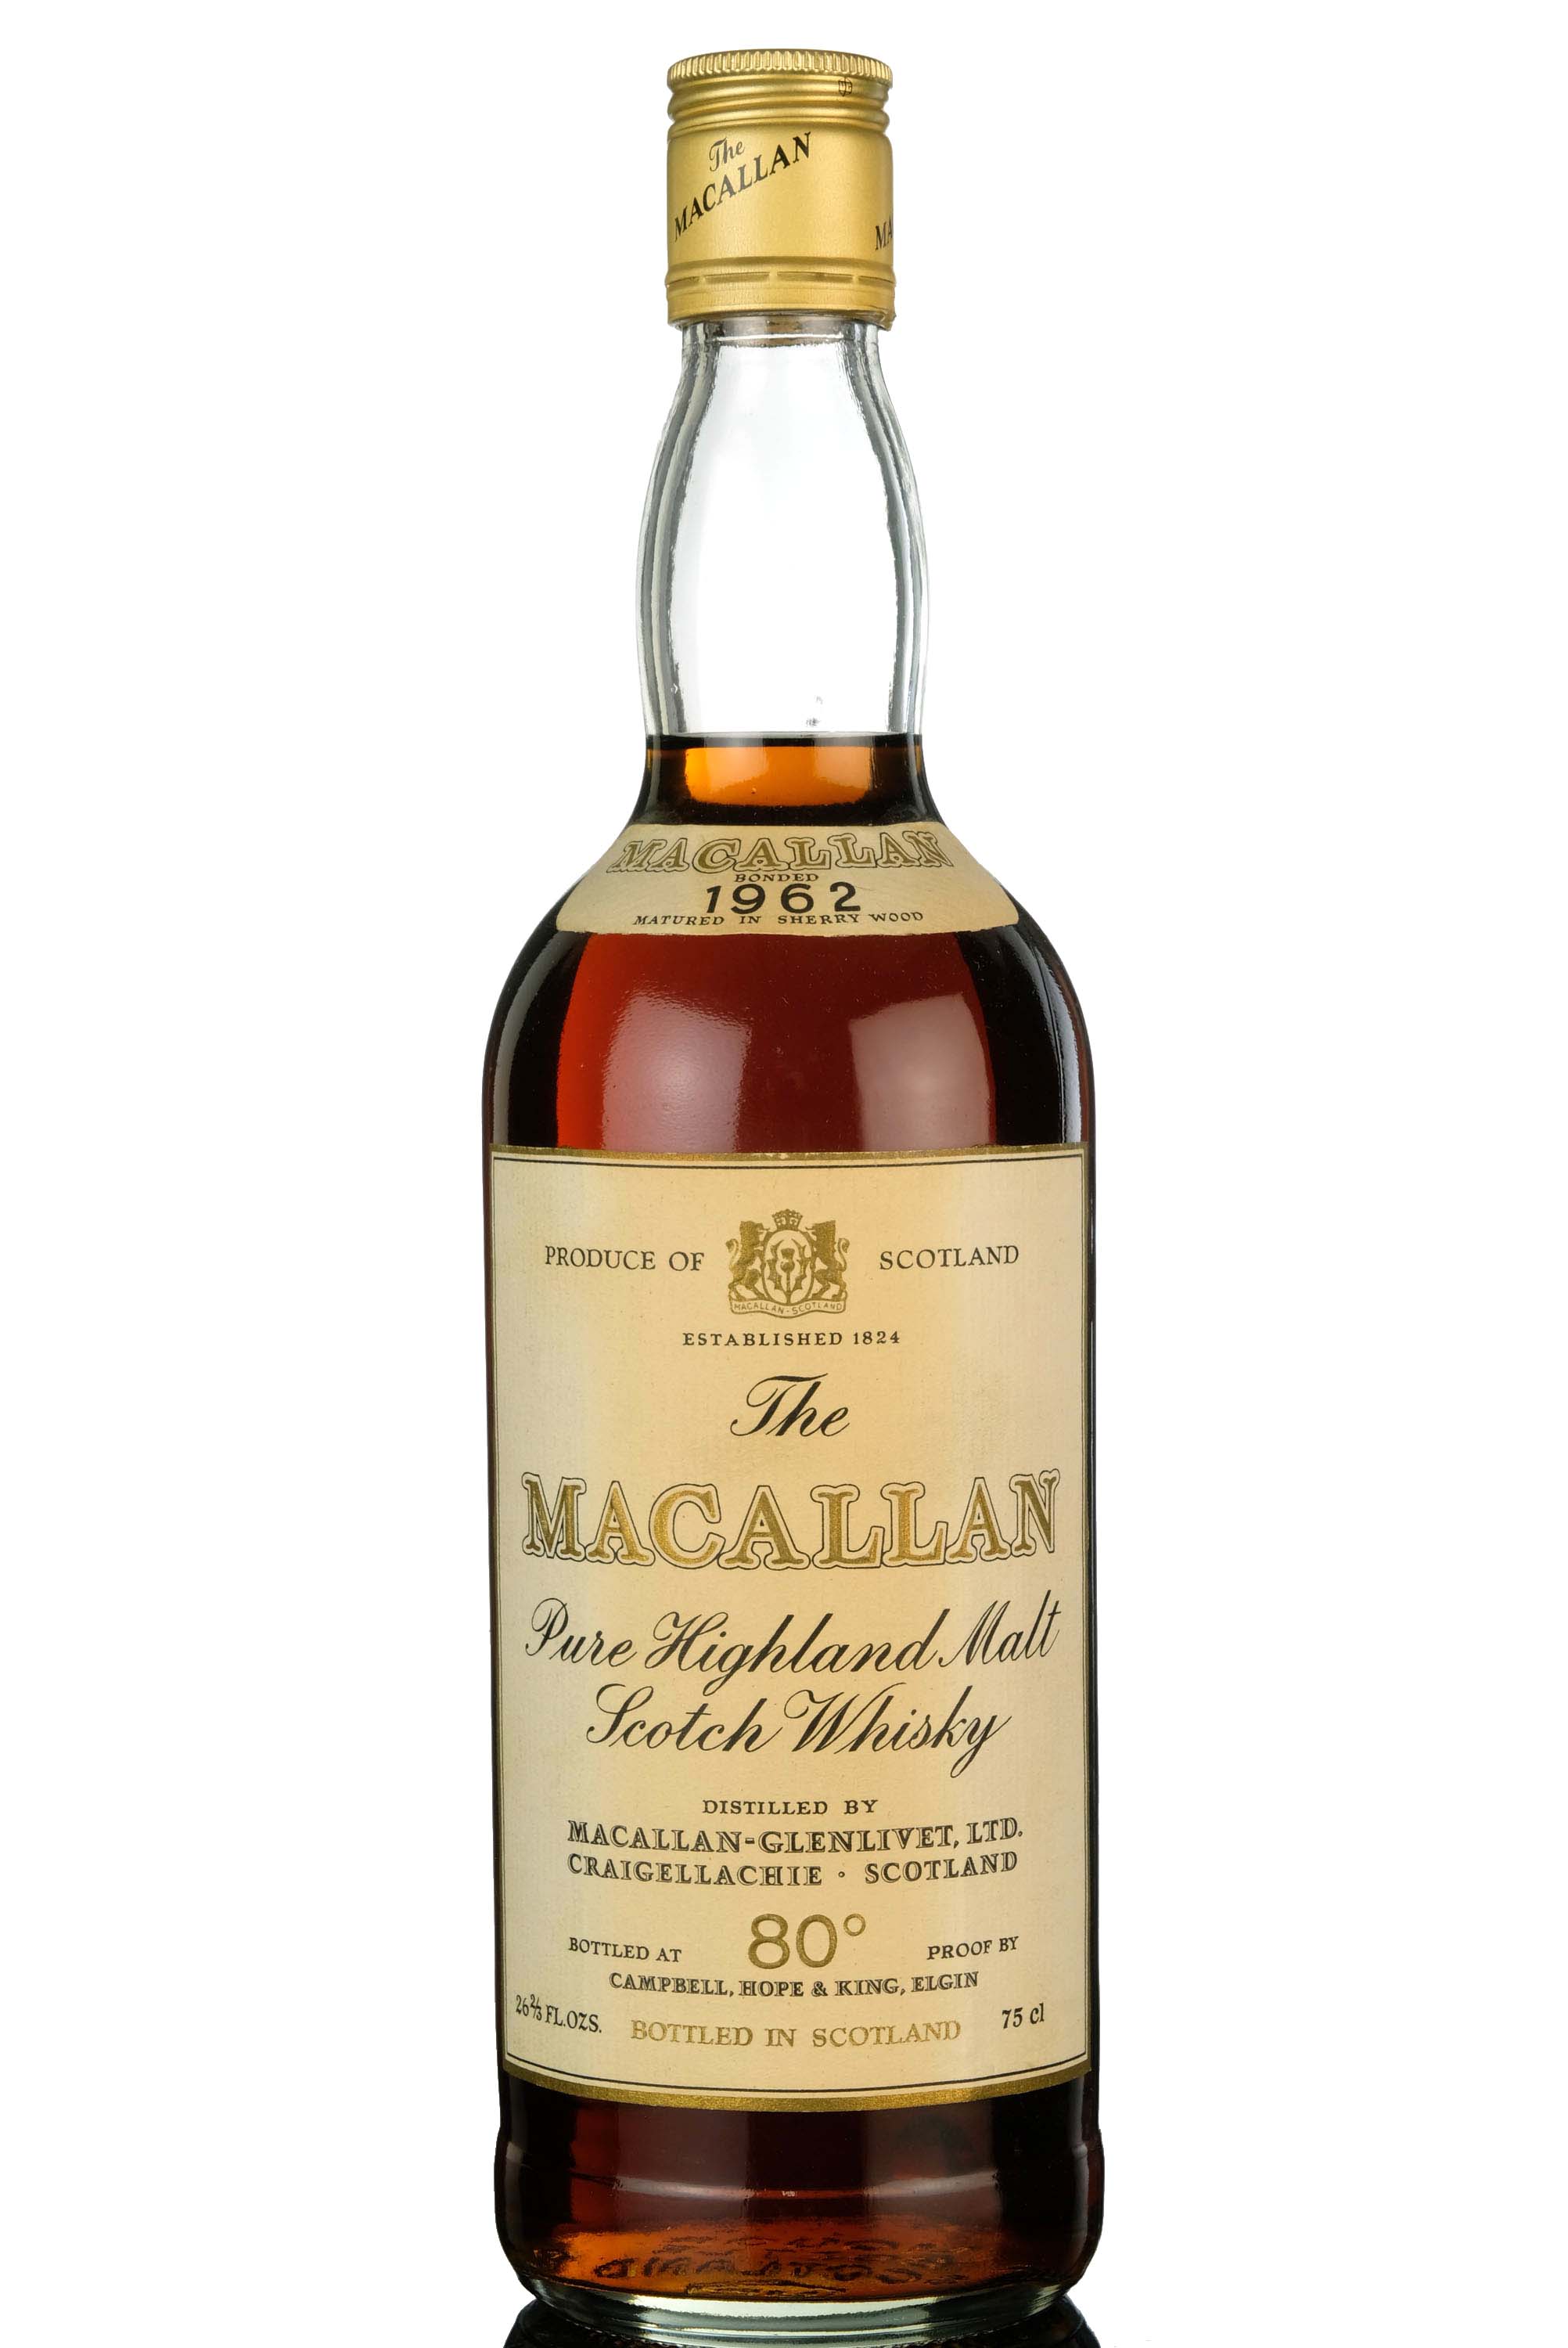 Macallan 1962 - Campbell Hope & King - 1970s